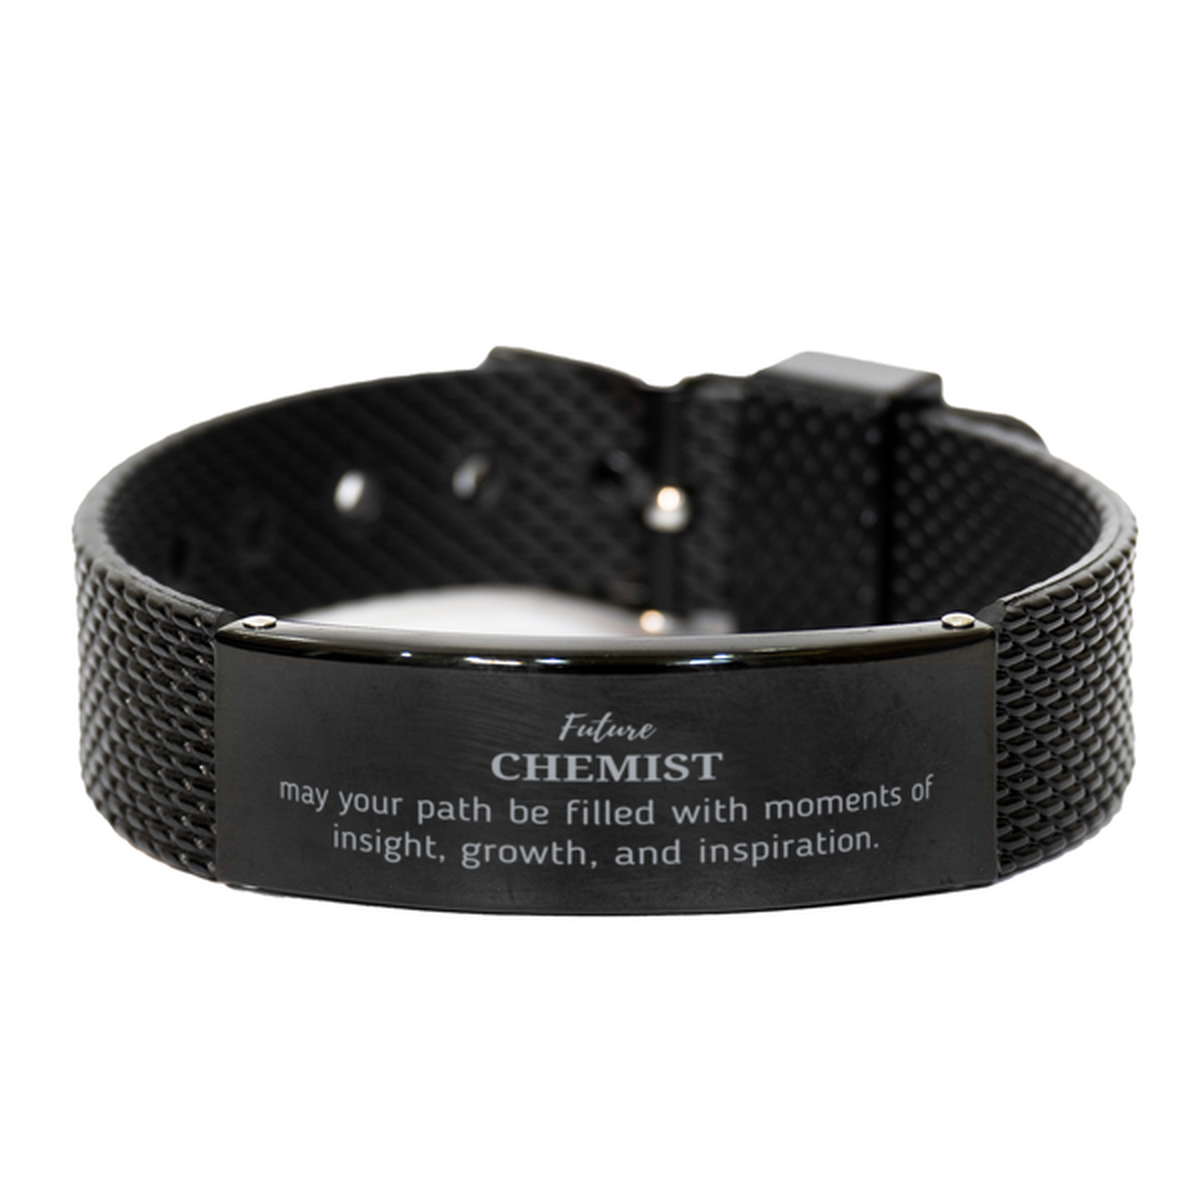 Future Chemist Gifts, May your path be filled with moments of insight, Graduation Gifts for New Chemist, Christmas Unique Black Shark Mesh Bracelet For Men, Women, Friends